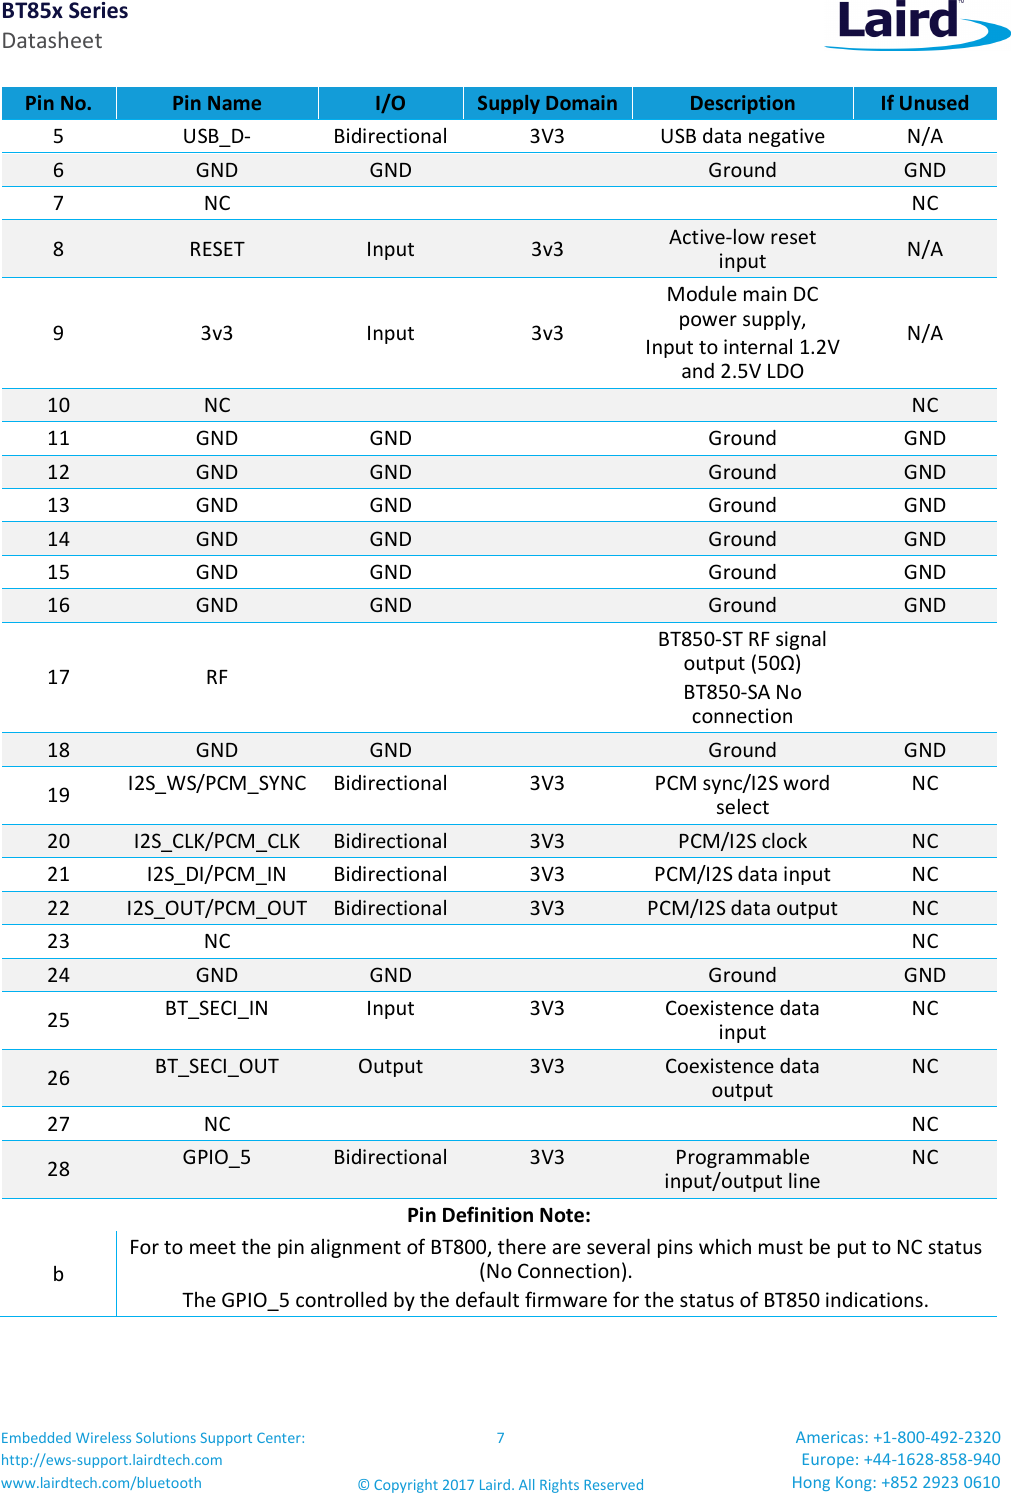 BT85x Series Datasheet Embedded Wireless Solutions Support Center: http://ews-support.lairdtech.com www.lairdtech.com/bluetooth 7 © Copyright 2017 Laird. All Rights Reserved Americas: +1-800-492-2320 Europe: +44-1628-858-940 Hong Kong: +852 2923 0610  Pin No.  Pin Name  I/O  Supply Domain Description  If Unused 5  USB_D-  Bidirectional 3V3  USB data negative  N/A 6  GND  GND    Ground  GND 7  NC        NC 8  RESET  Input  3v3  Active-low reset input  N/A 9  3v3  Input  3v3 Module main DC power supply, Input to internal 1.2V and 2.5V LDO N/A 10  NC        NC 11  GND  GND    Ground  GND 12  GND  GND    Ground  GND 13  GND  GND    Ground  GND 14  GND  GND    Ground  GND 15  GND  GND    Ground  GND 16  GND  GND    Ground  GND 17  RF     BT850-ST RF signal output (50Ω) BT850-SA No connection  18  GND  GND    Ground  GND 19  I2S_WS/PCM_SYNC Bidirectional 3V3  PCM sync/I2S word select NC 20  I2S_CLK/PCM_CLK  Bidirectional 3V3  PCM/I2S clock  NC 21  I2S_DI/PCM_IN  Bidirectional 3V3  PCM/I2S data input  NC 22  I2S_OUT/PCM_OUT Bidirectional 3V3  PCM/I2S data output NC 23  NC        NC 24  GND  GND    Ground  GND 25  BT_SECI_IN  Input  3V3  Coexistence data input NC 26  BT_SECI_OUT  Output  3V3  Coexistence data output NC 27  NC        NC 28  GPIO_5  Bidirectional 3V3  Programmable input/output line NC Pin Definition Note: b  For to meet the pin alignment of BT800, there are several pins which must be put to NC status (No Connection). The GPIO_5 controlled by the default firmware for the status of BT850 indications.  